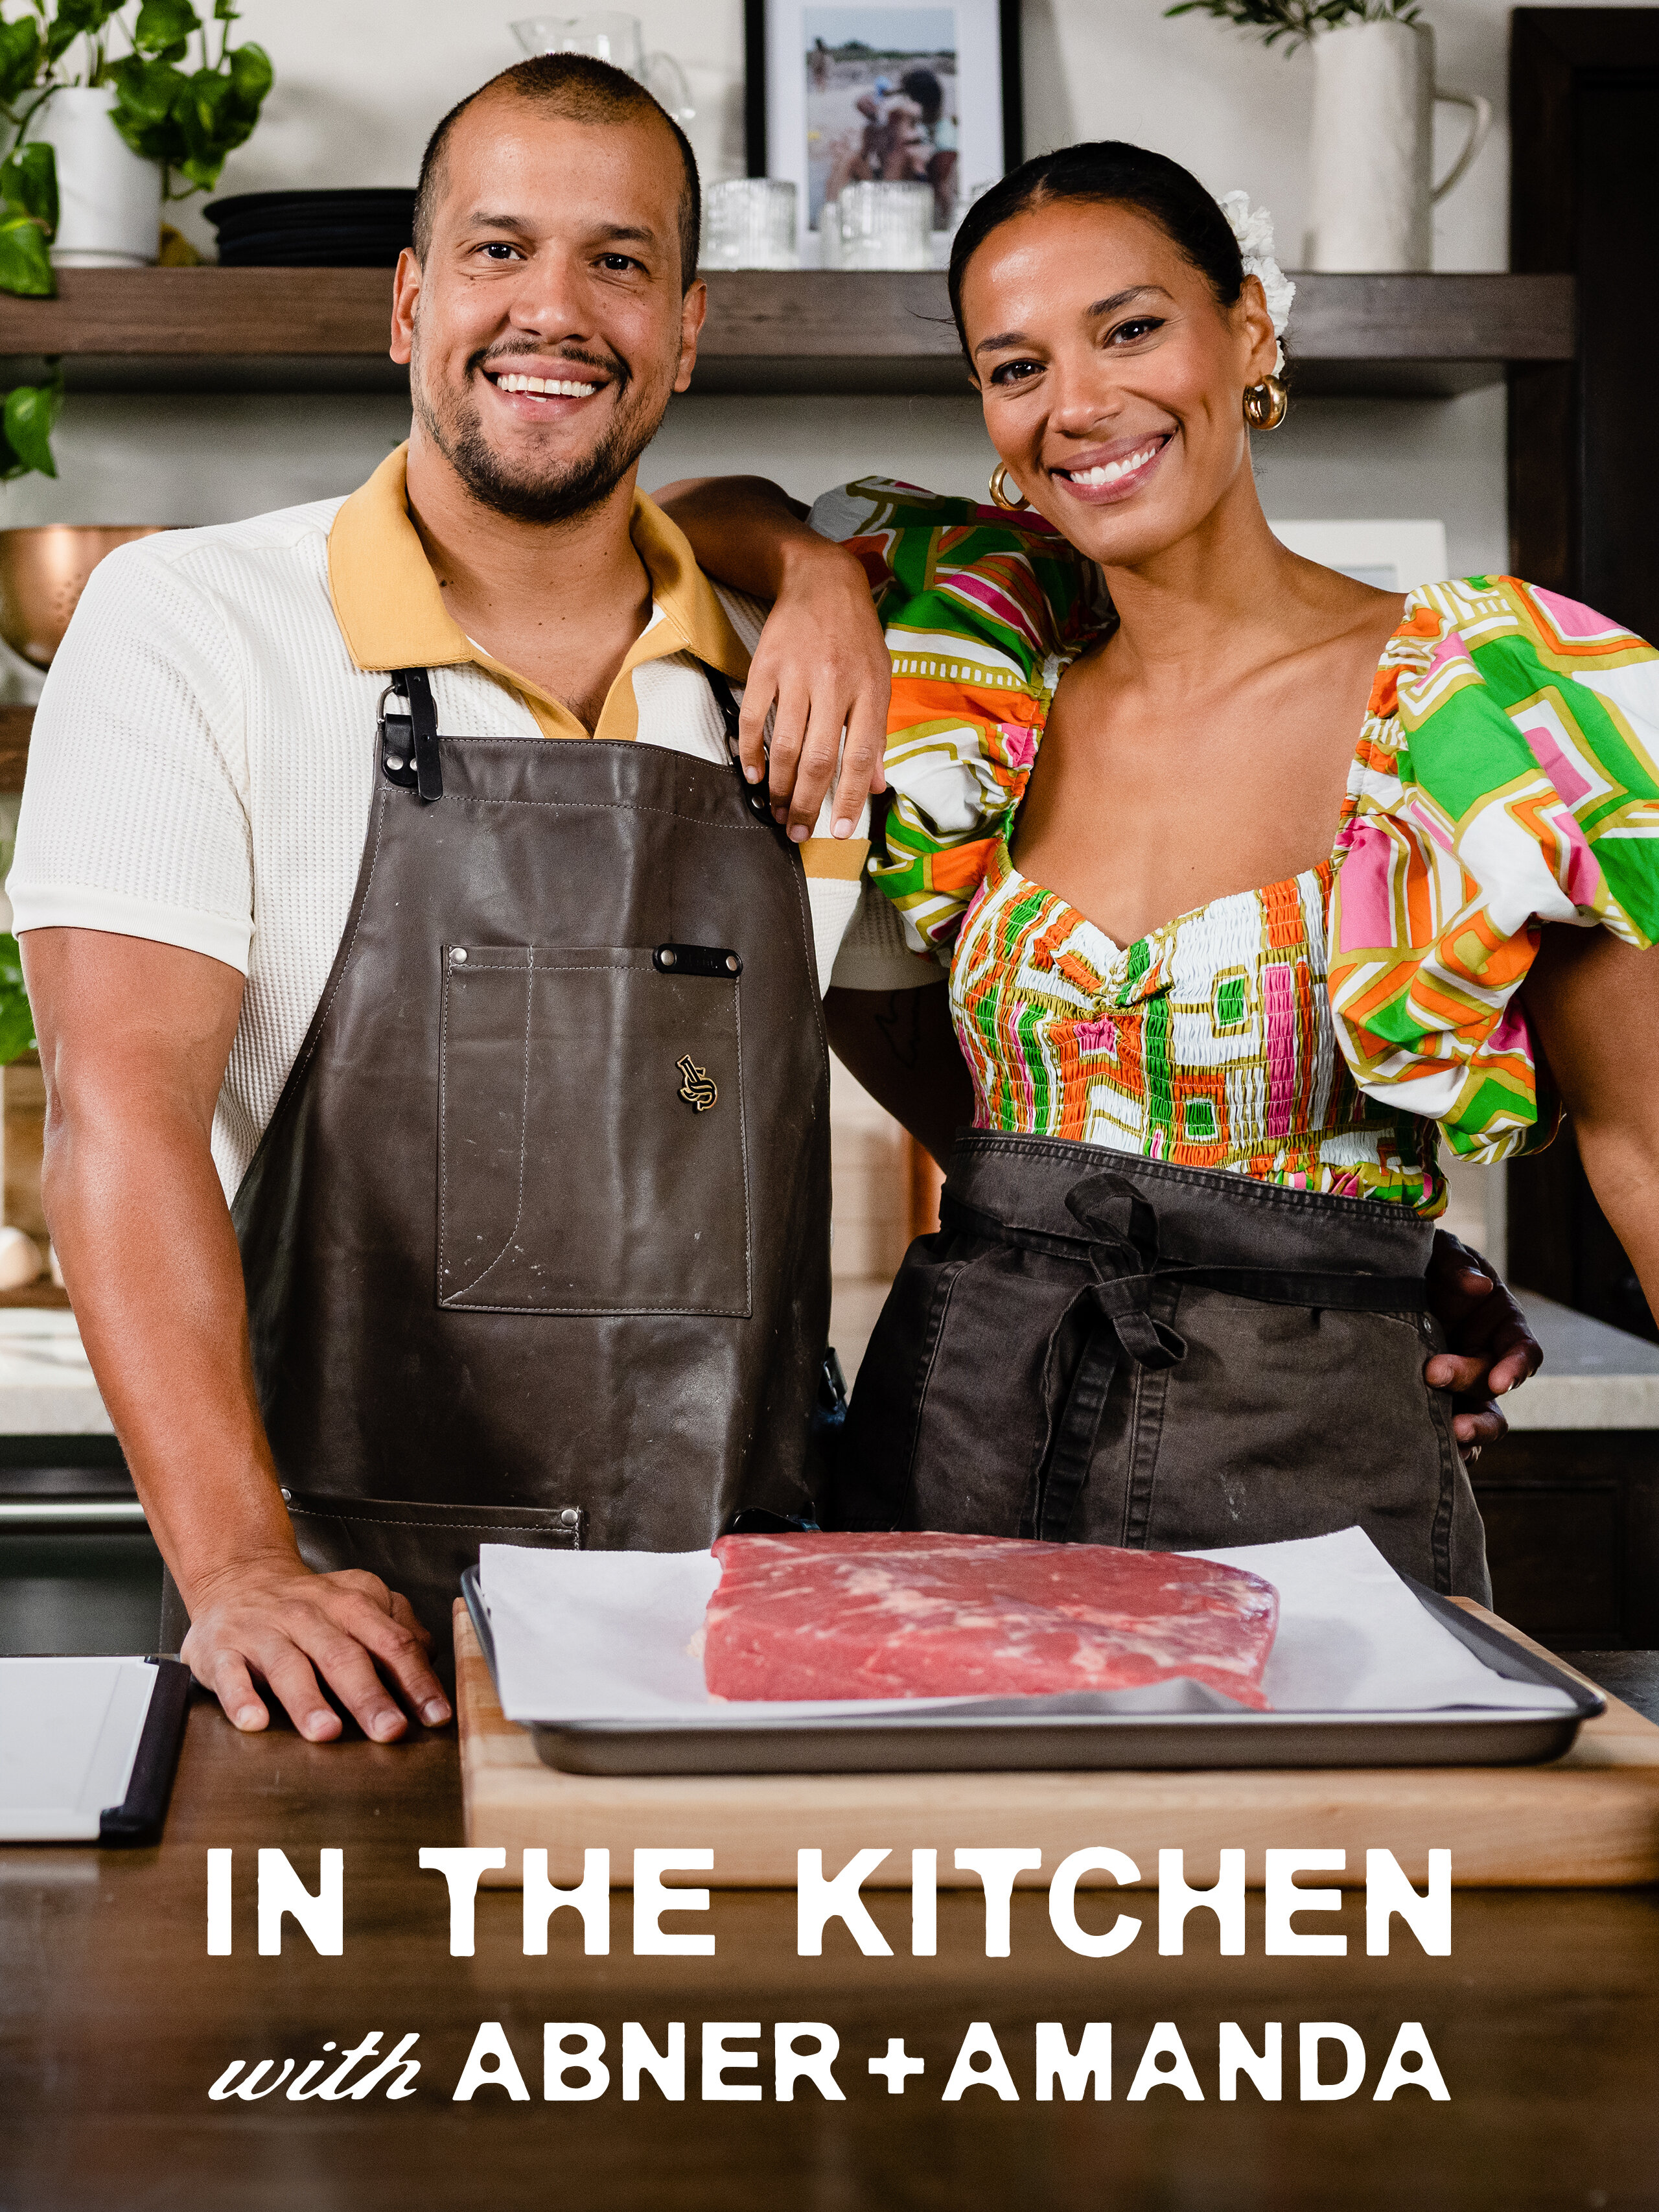 In the Kitchen with Abner and Amanda ne zaman